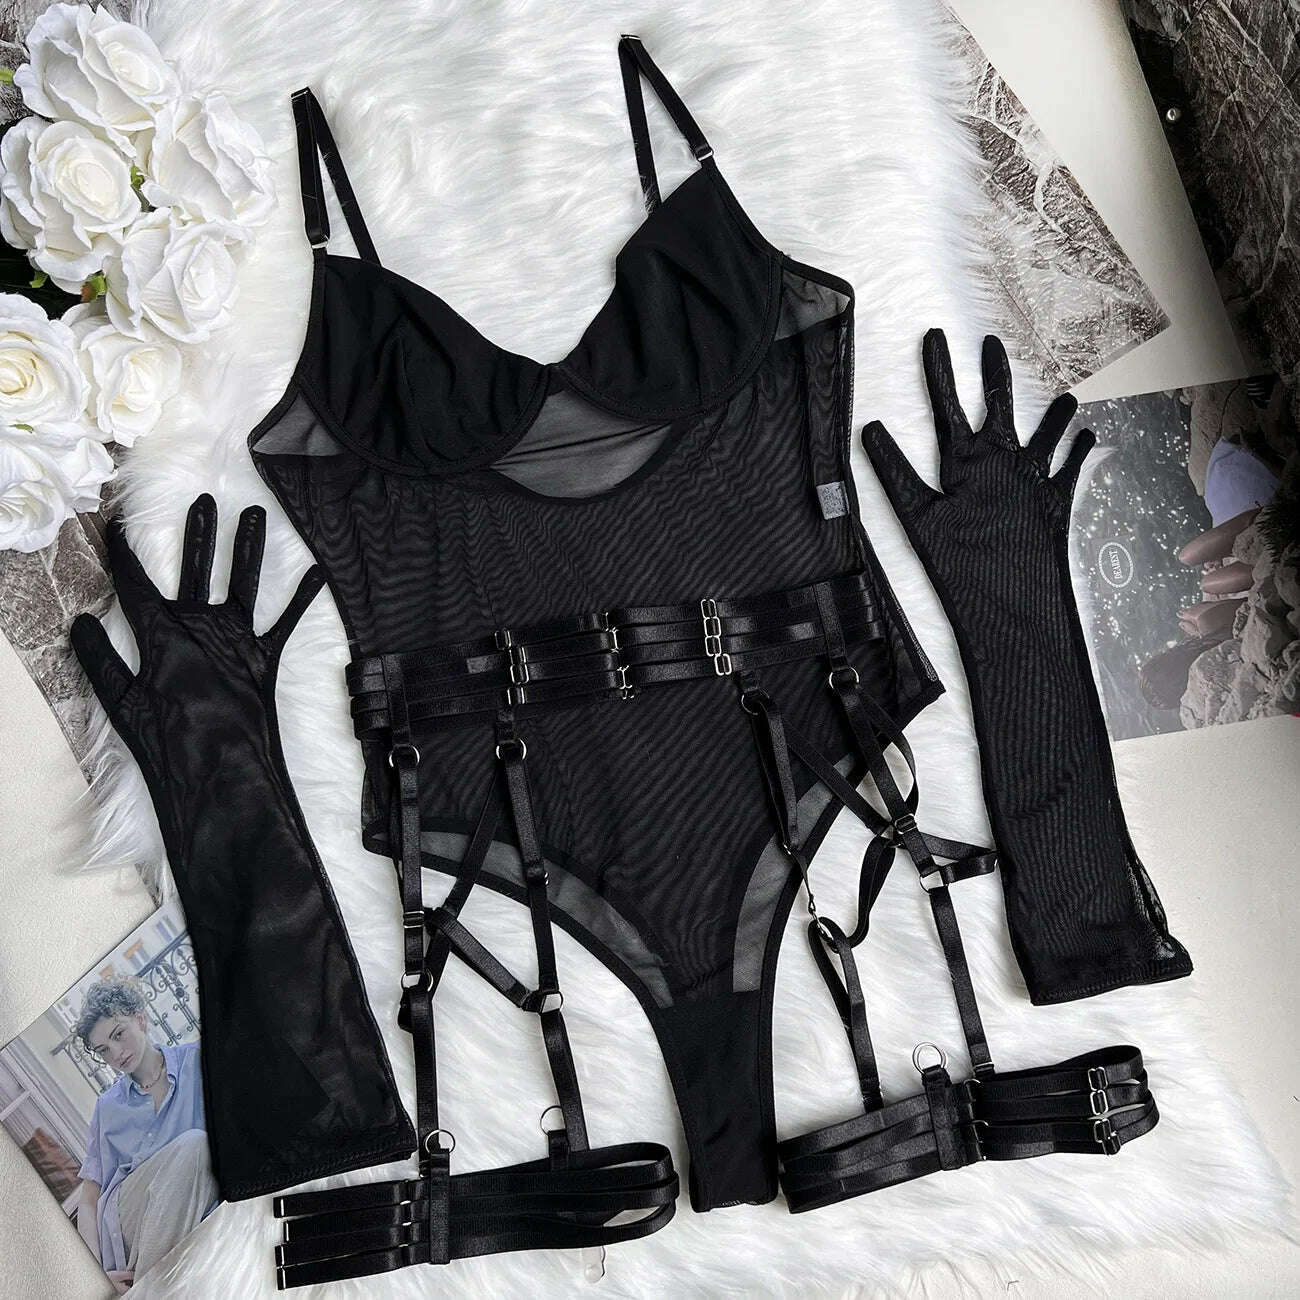 KIMLUD, Ellolace Tight Fitting Lace Bodysuit Sexy See Through Body With Gloves Garter Night Club Outfit Sissy Crotchless Mesh Top, Black / S, KIMLUD Womens Clothes